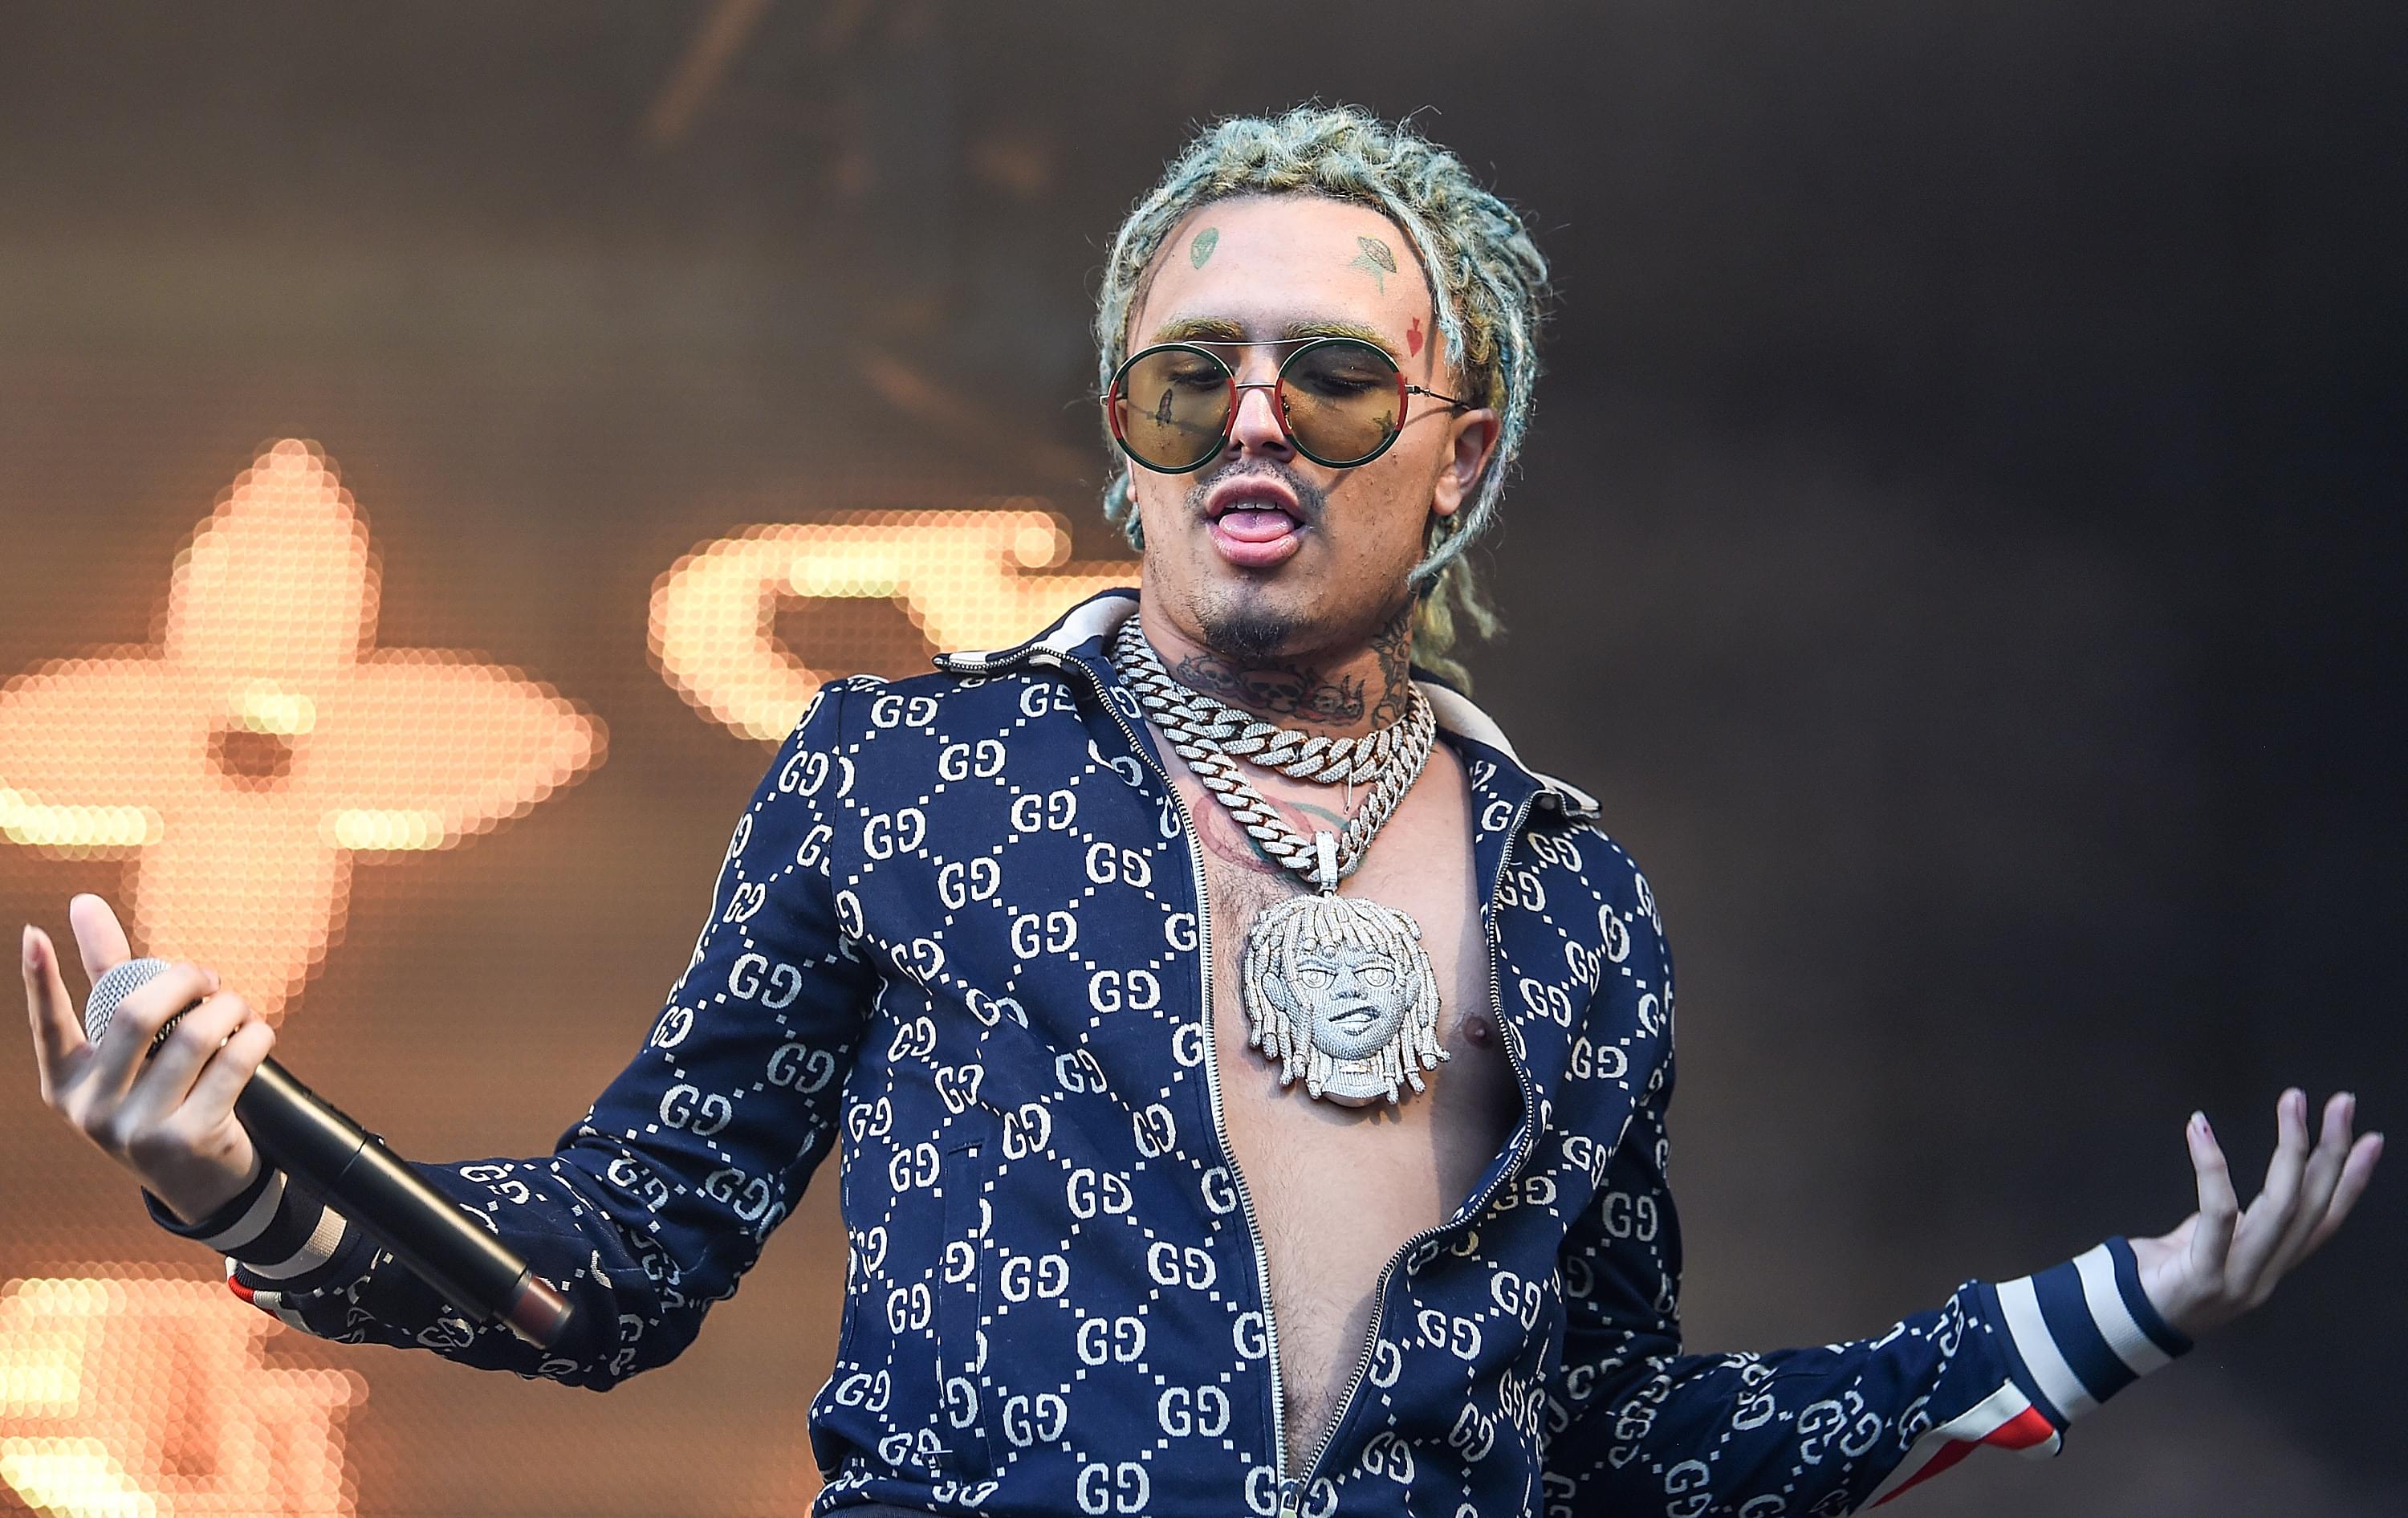 Chinese Rappers Release Diss Tracks Targeting Lil Pump